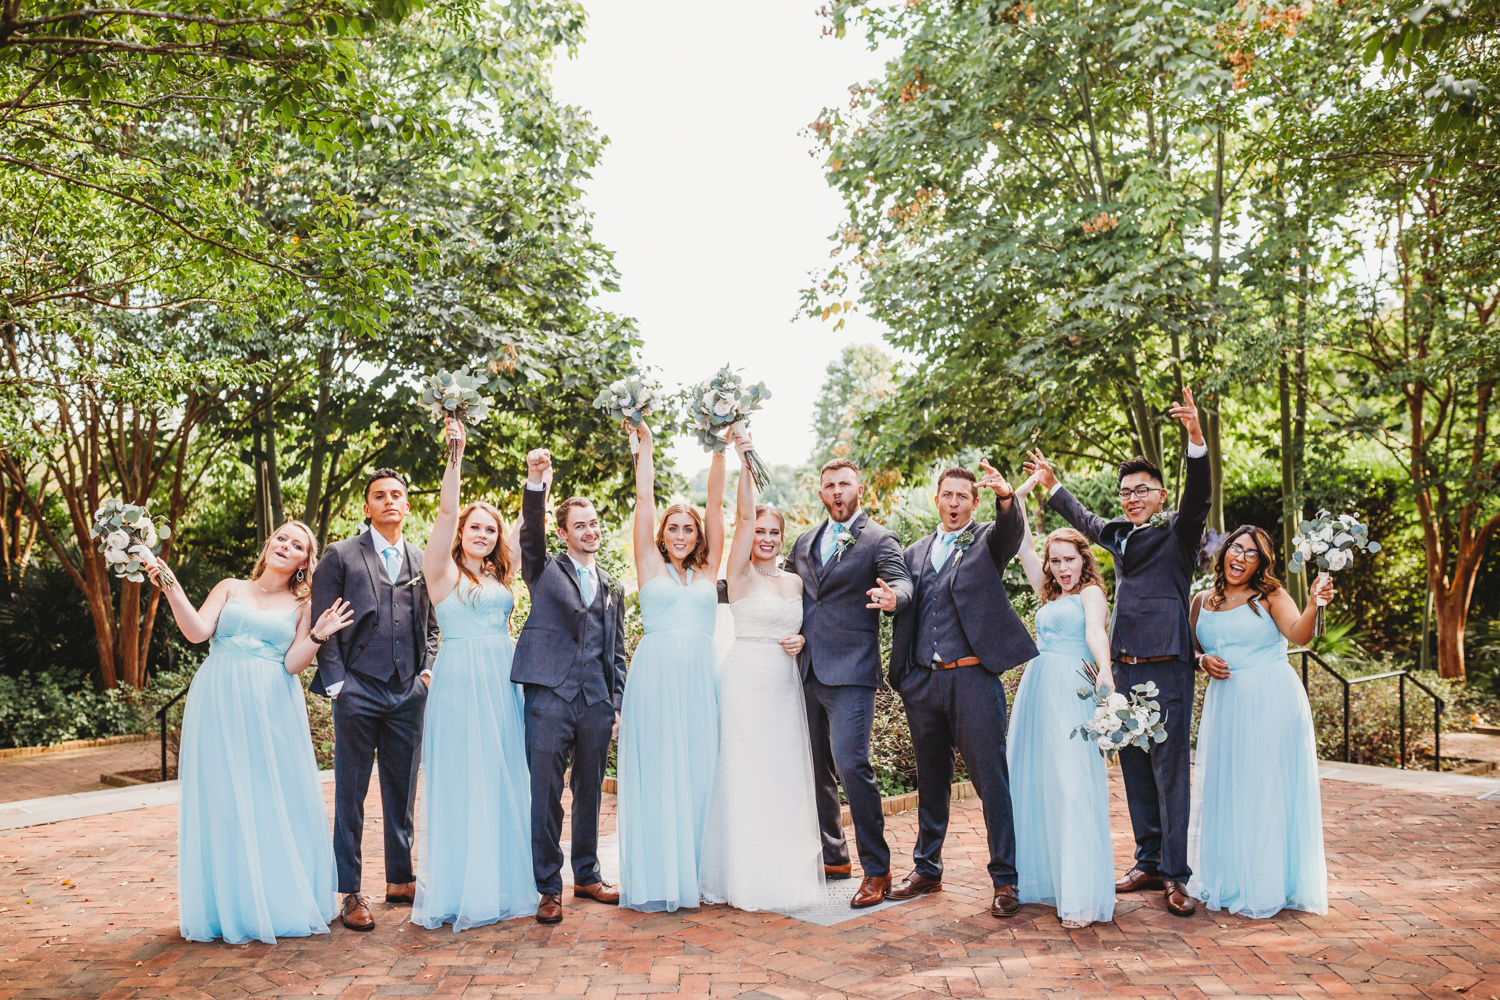 Daniel Stowe Botanical Garden wedding, Daniel Stowe garden wedding, Charlotte wedding photographer, Charlotte North Carolina wedding photographer, Wedding Venues Charlotte North Carolina, Garden Wedding, Charlotte North Carolina Wedding,  Downtown Charlotte Wedding, Charleston Wedding Photographer, North Carolina Elopement Photographer, wedding photography, wedding inspiration, wedding photos, bridal party pictures, bridal party outfits, bridal party color palettes, bridal party dresses